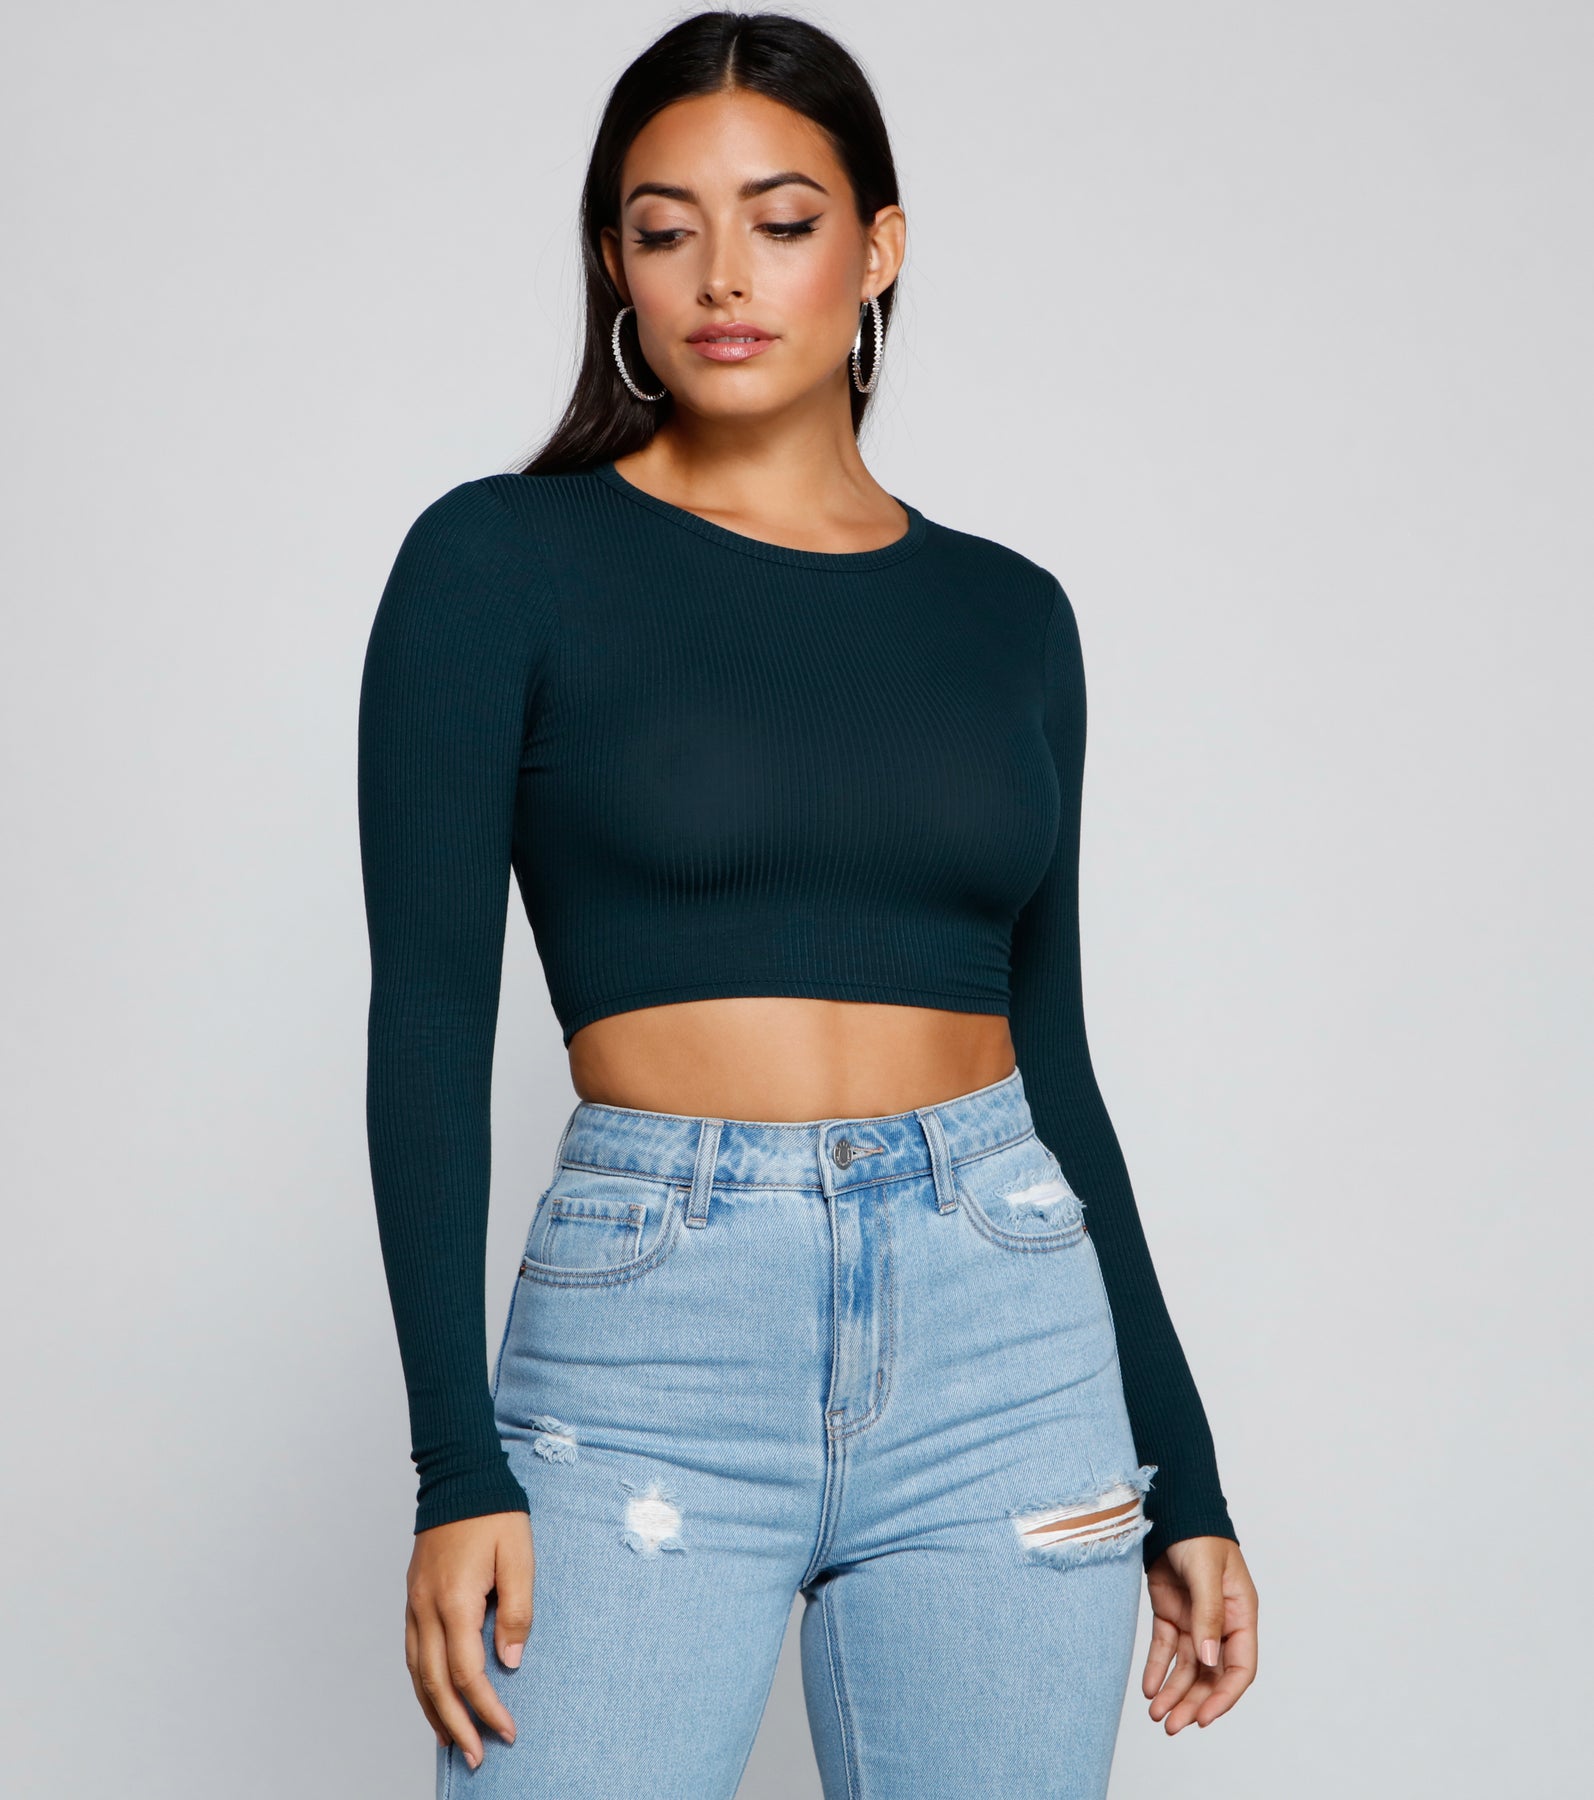 Go With It Ribbed Knit Crop Top & Windsor